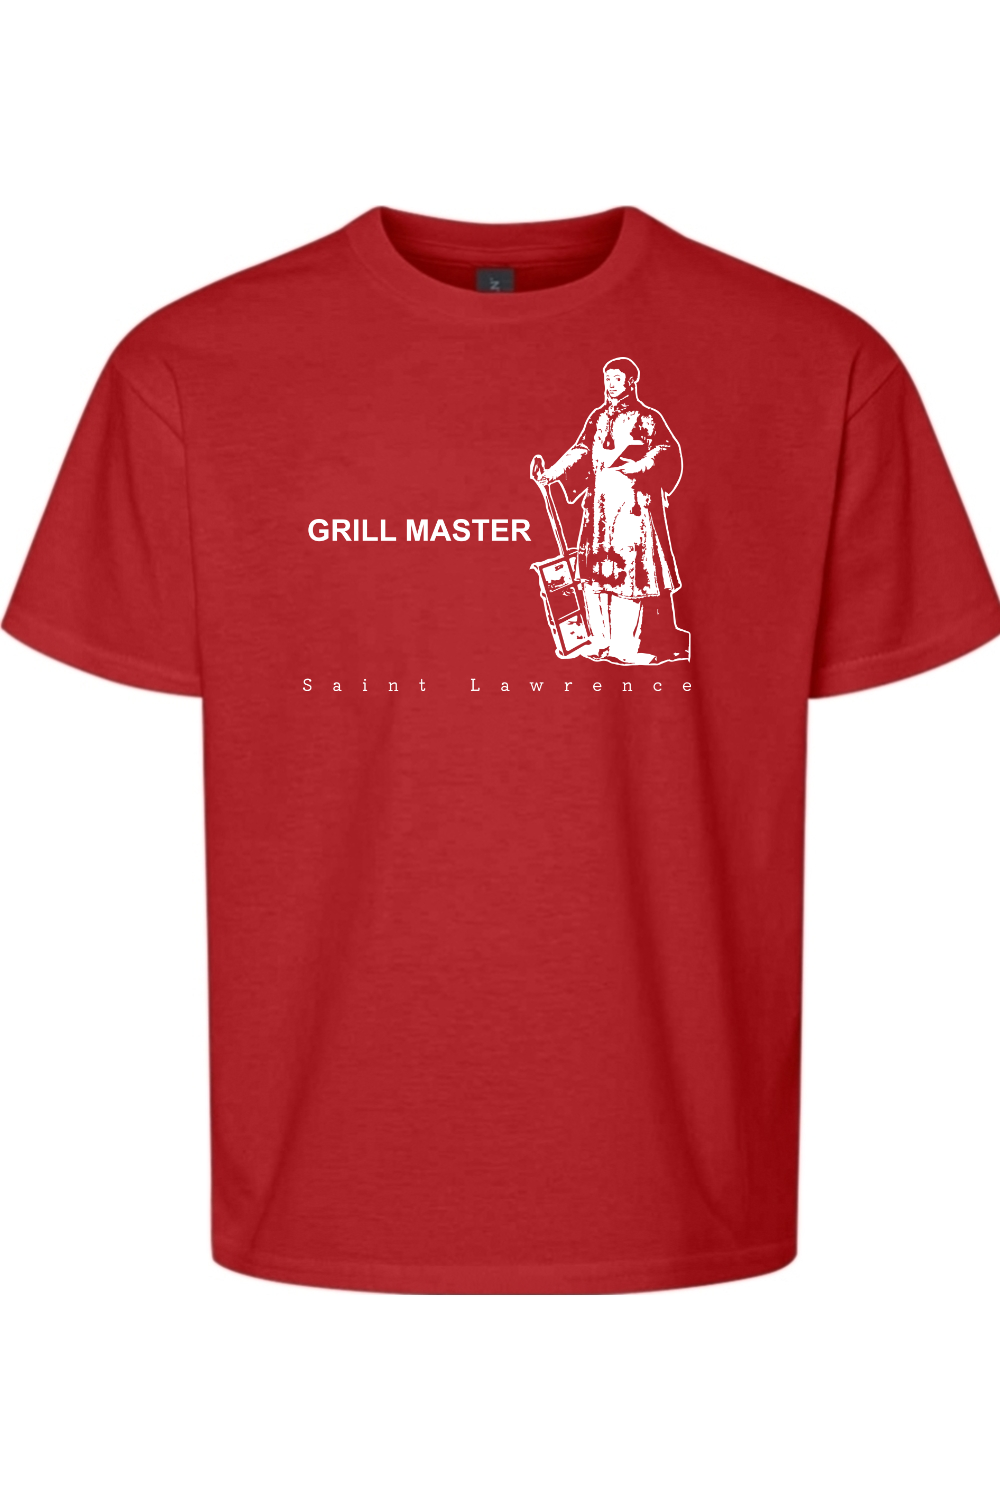 Grill Master - St. Lawrence Youth T-Shirt